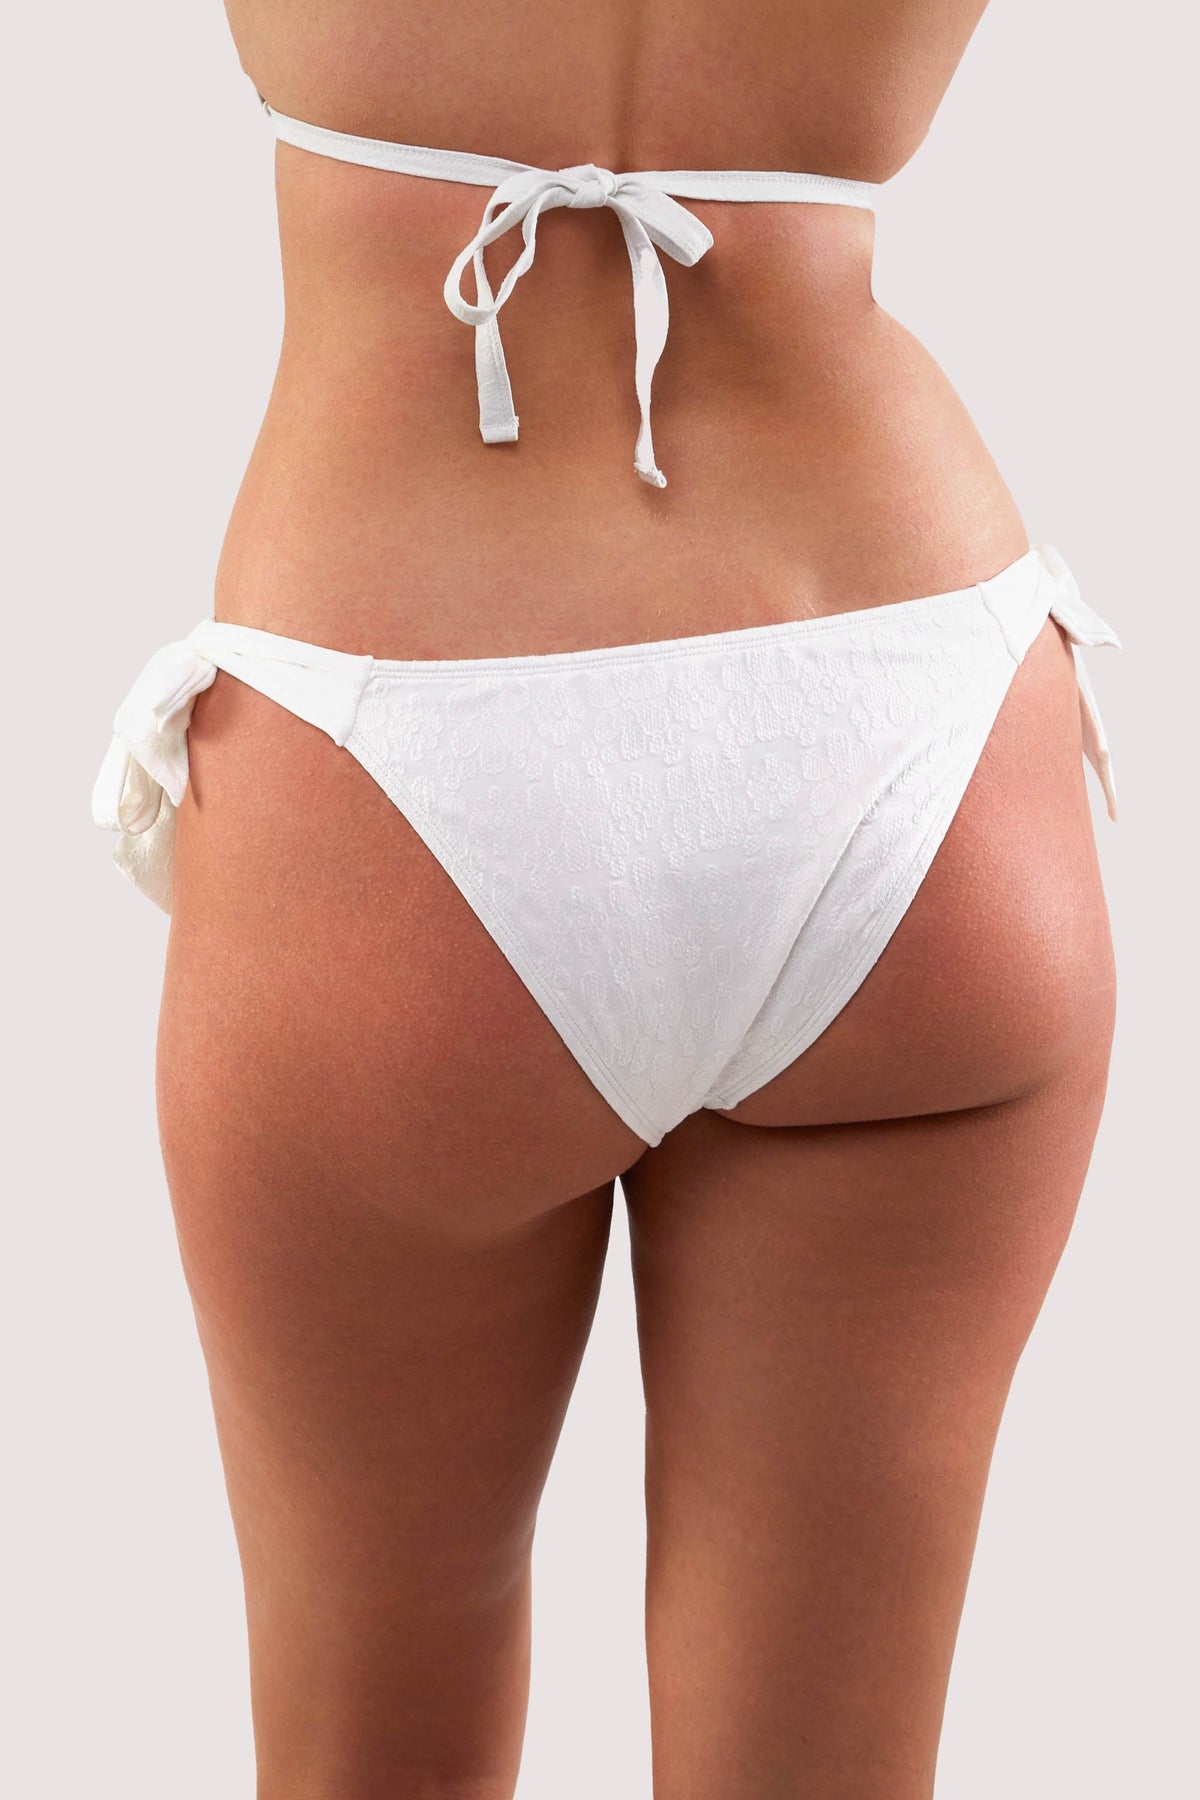 Model shows brief of white floral texture tie side bikini bottoms